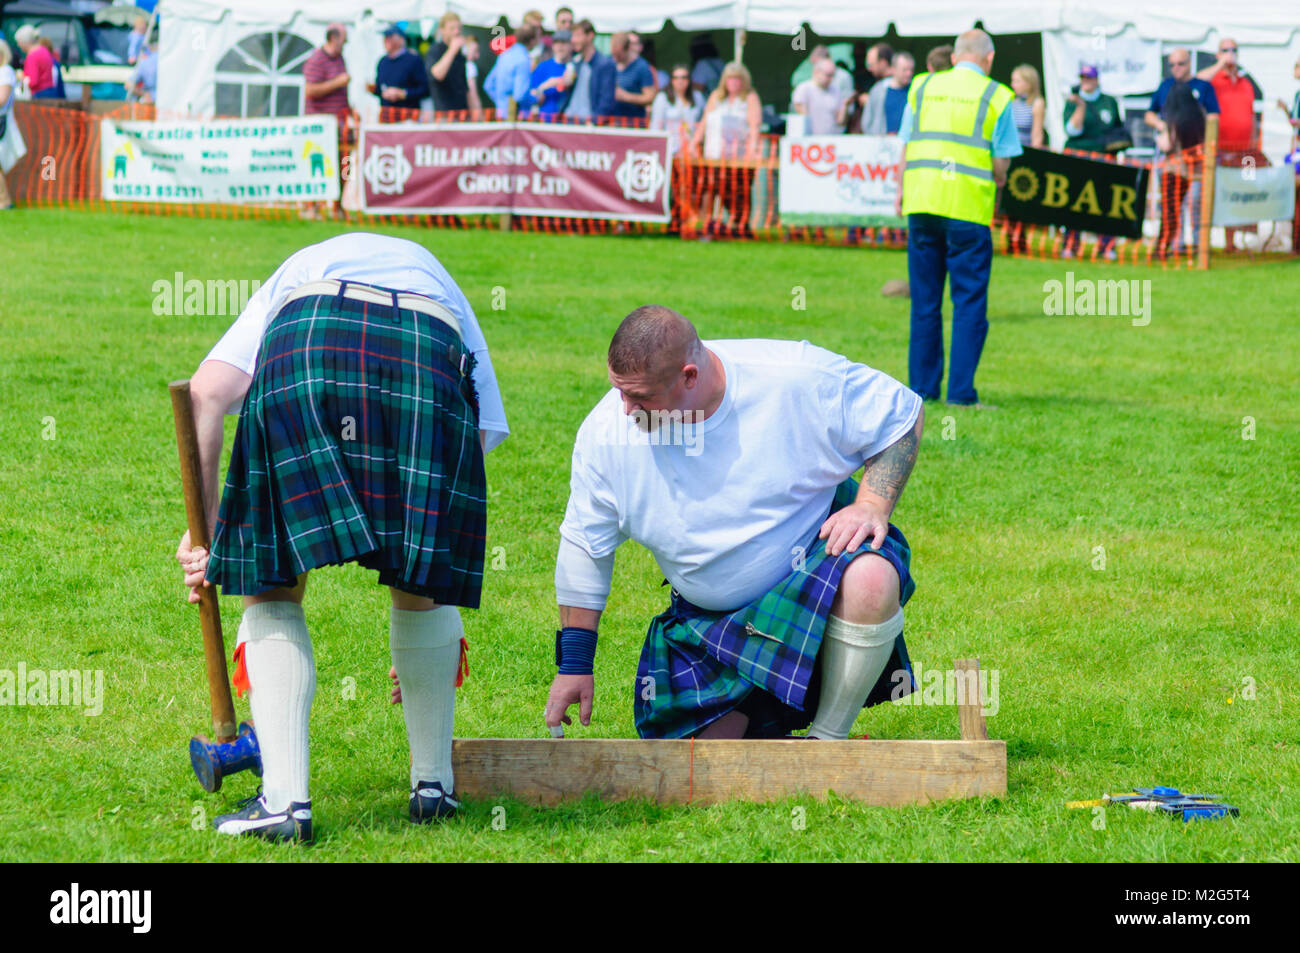 Male competitors preparing to compete in the heavy events at the Dundonald Highland Games, Ayrshire, which celebrates traditional Scottish culture Stock Photo